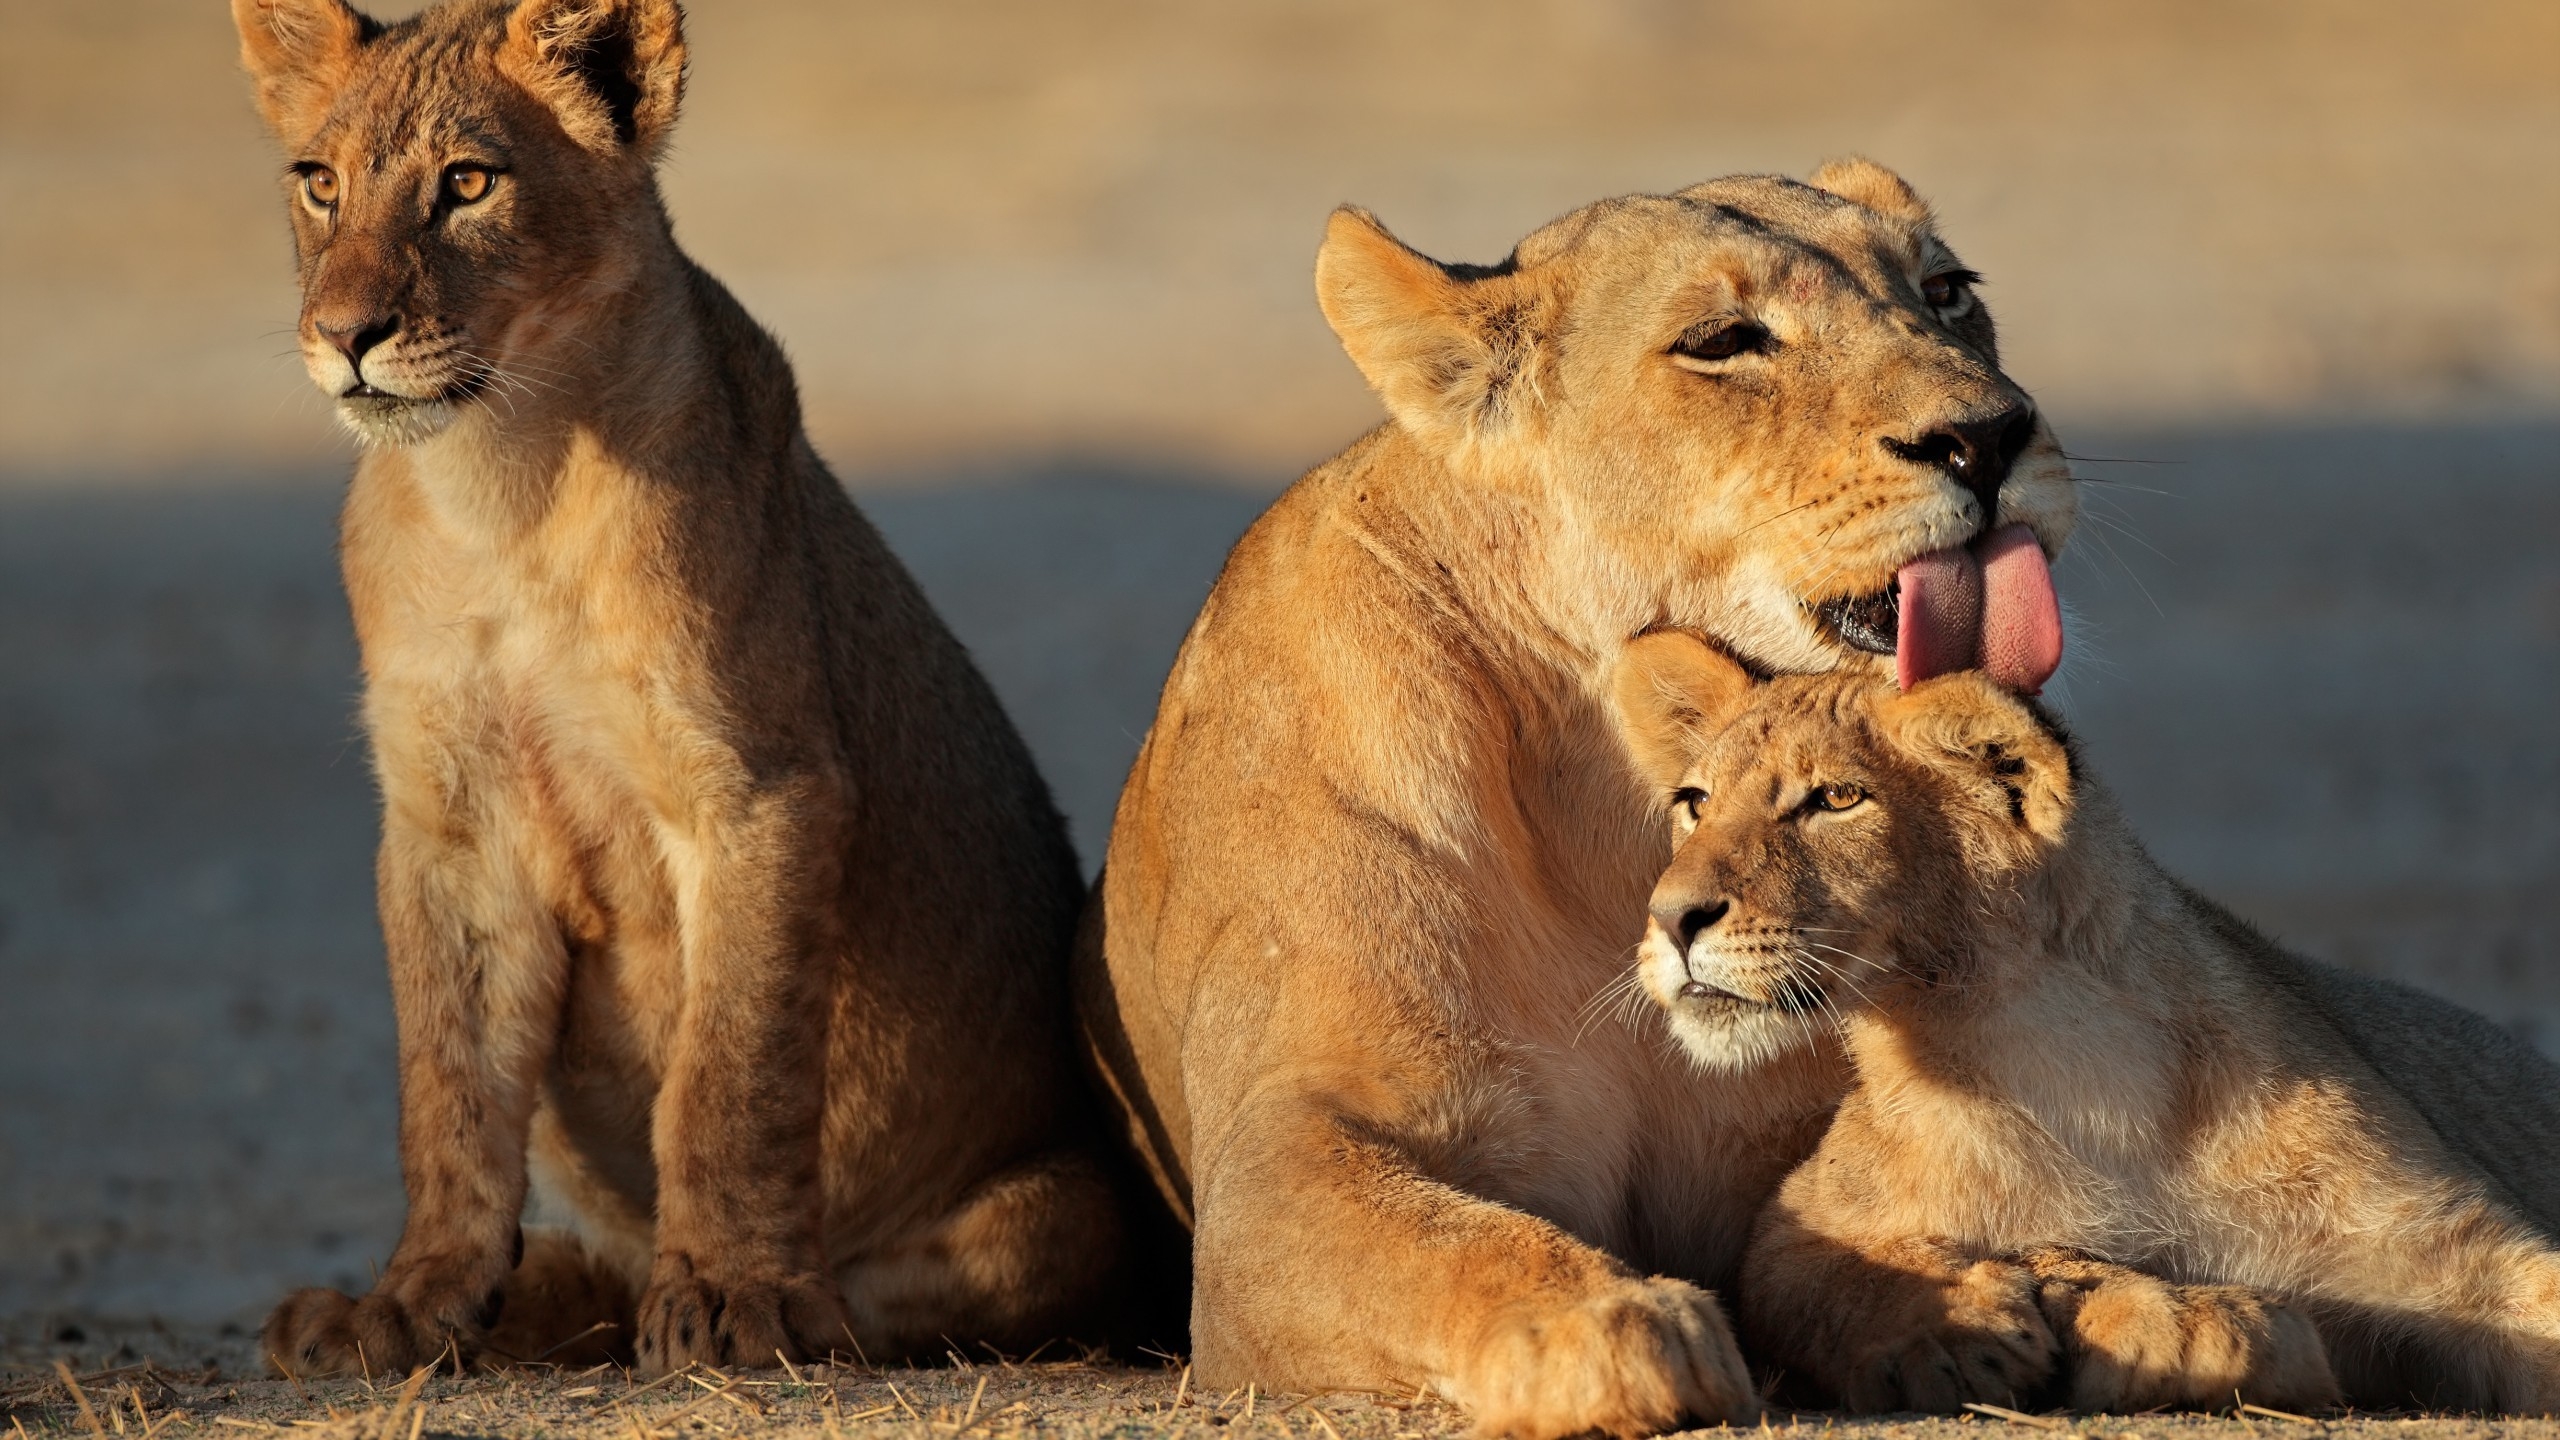 Young Lion Family for 2560x1440 HDTV resolution